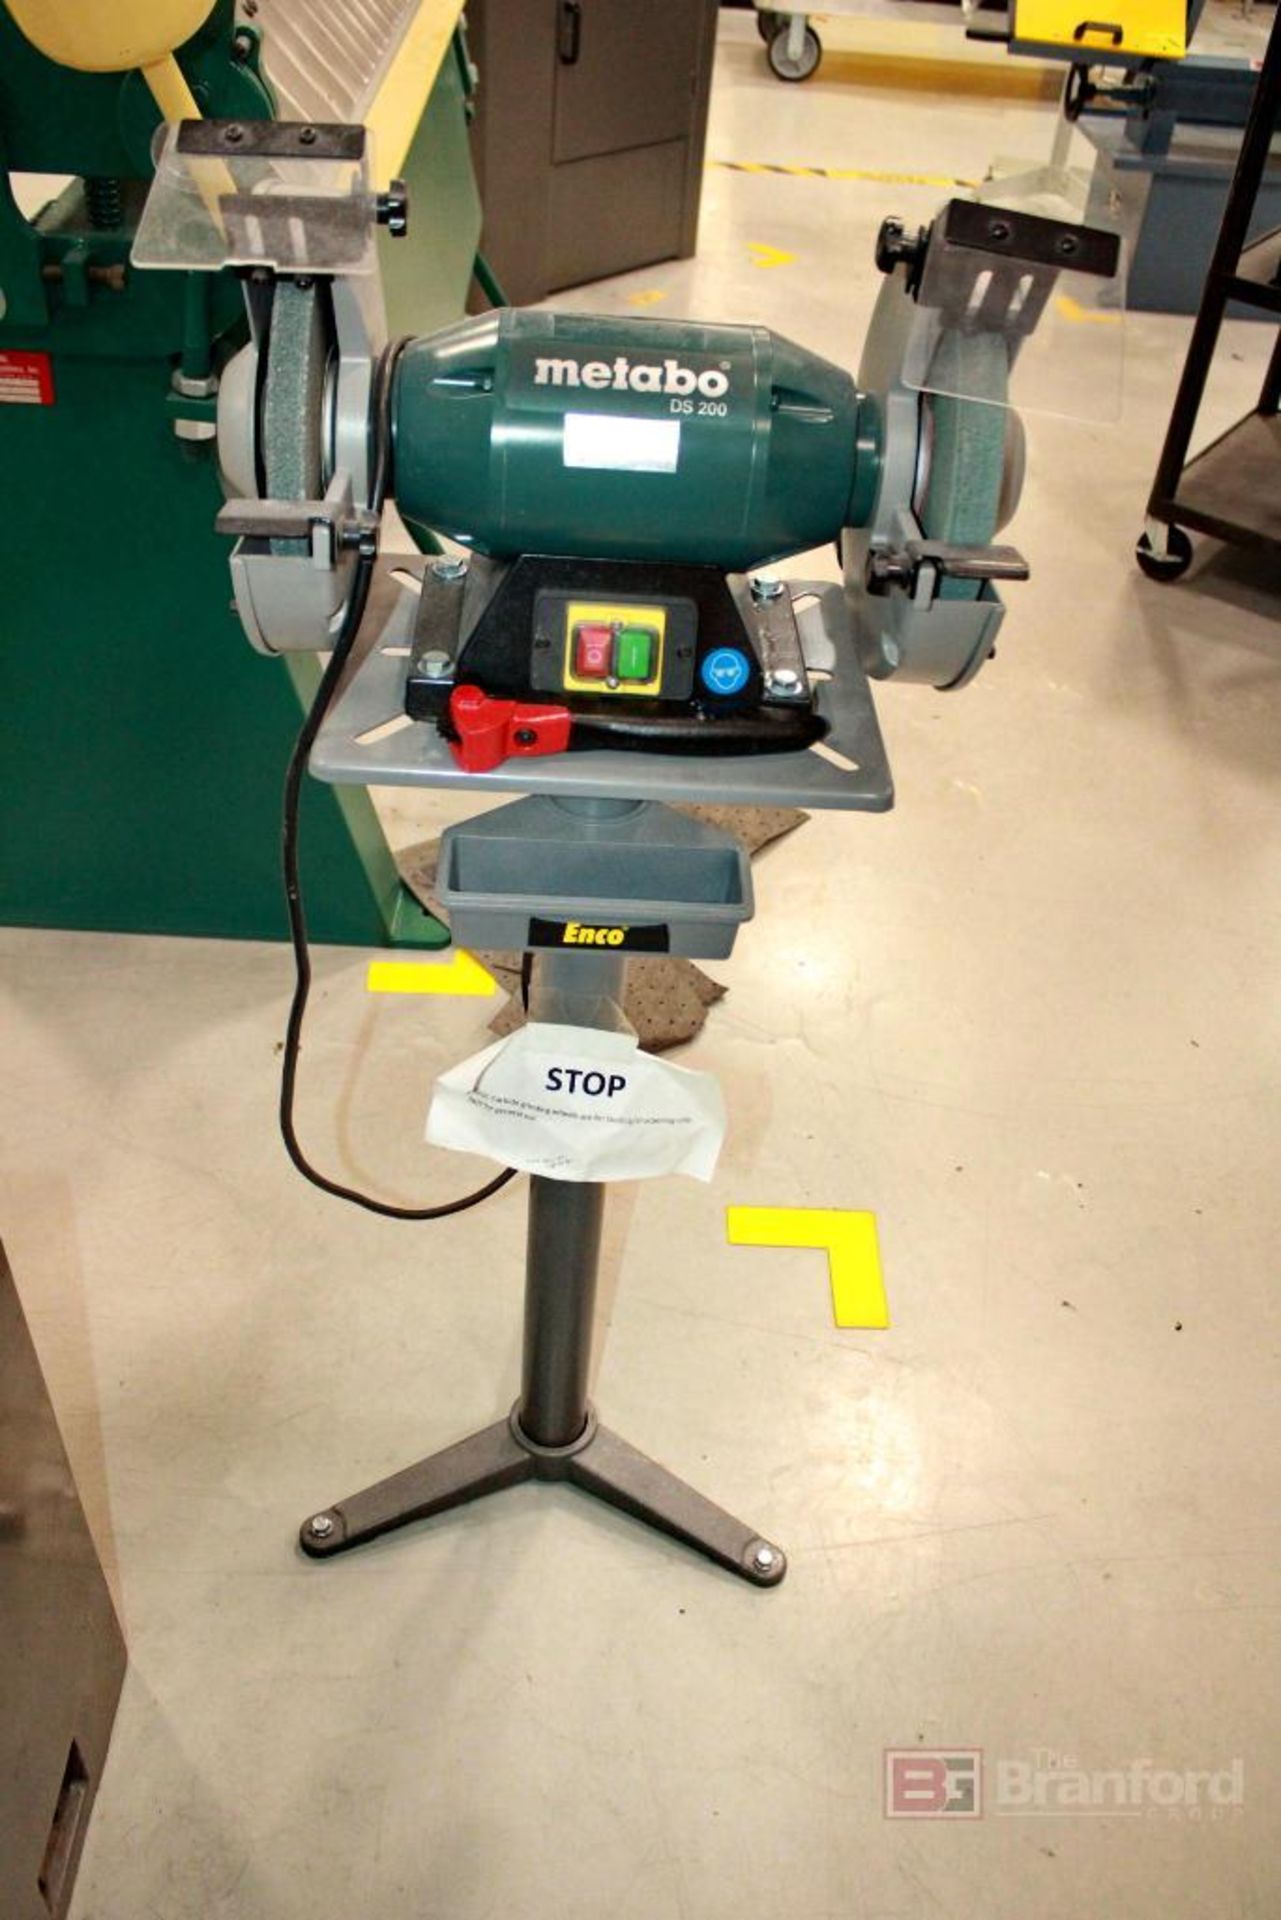 Metabo Bench Grinder Model DD 200 with Enco Stand